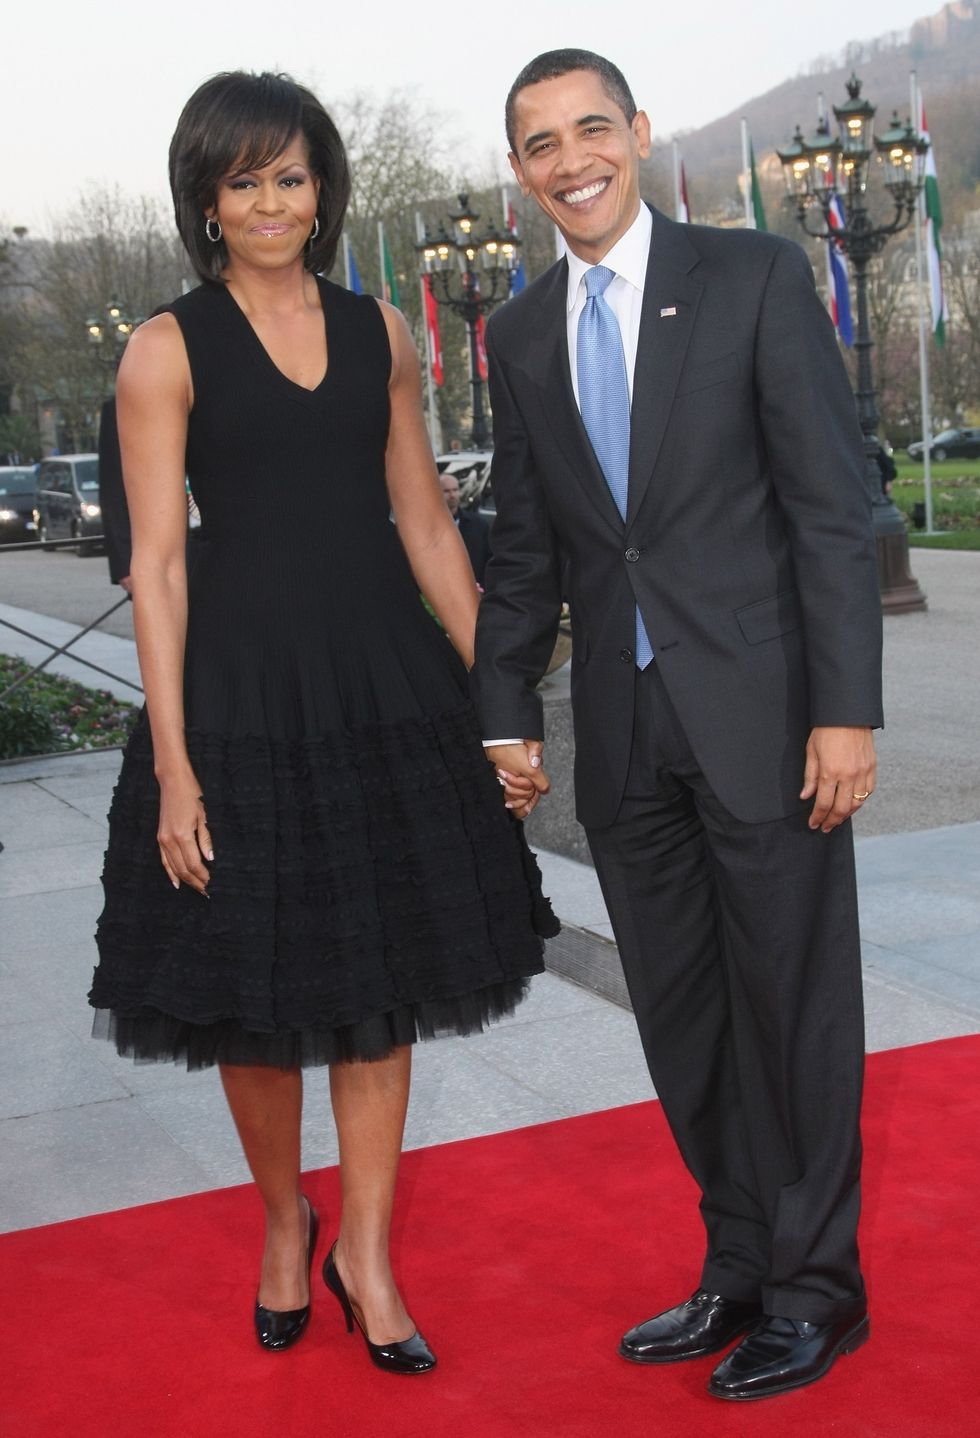 Michelle Obama again in Alaia. Taken in Germany in 2009, this style of dress was iconic to the brand. Picture via Pinterest.